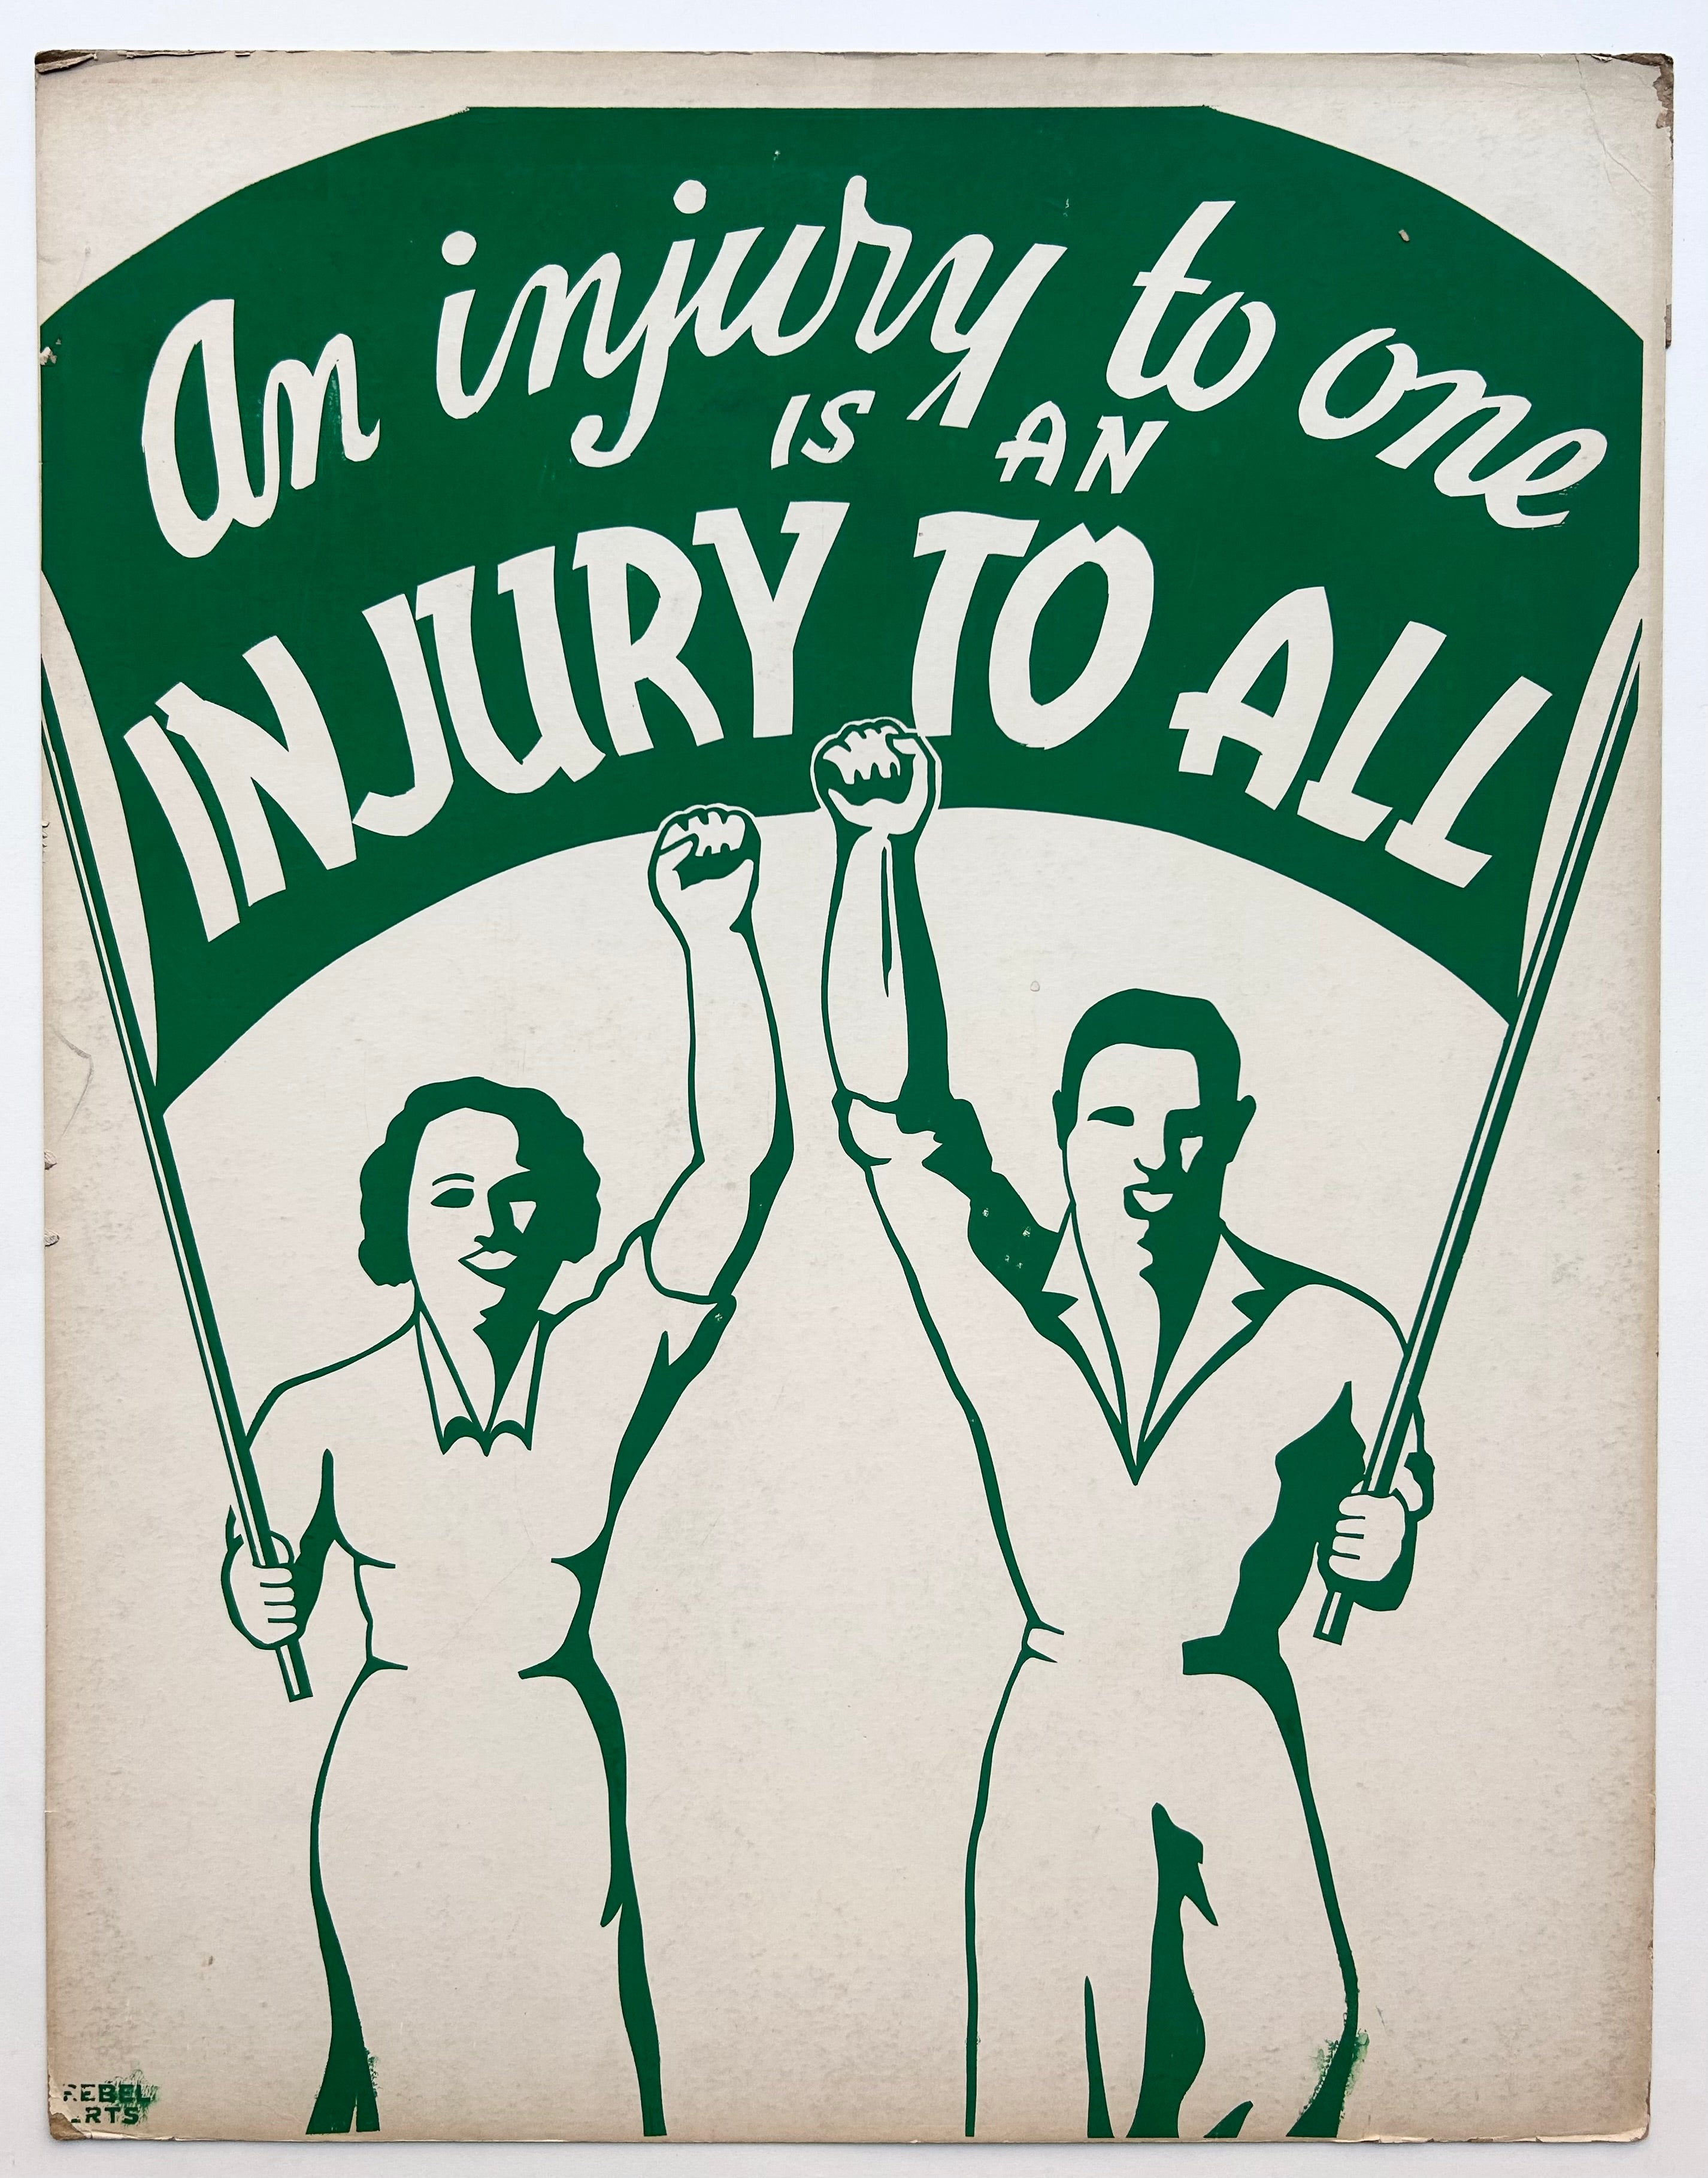 Cardboard poster with white background and green imaging. Two people holding a sign march with their fists in the air. 